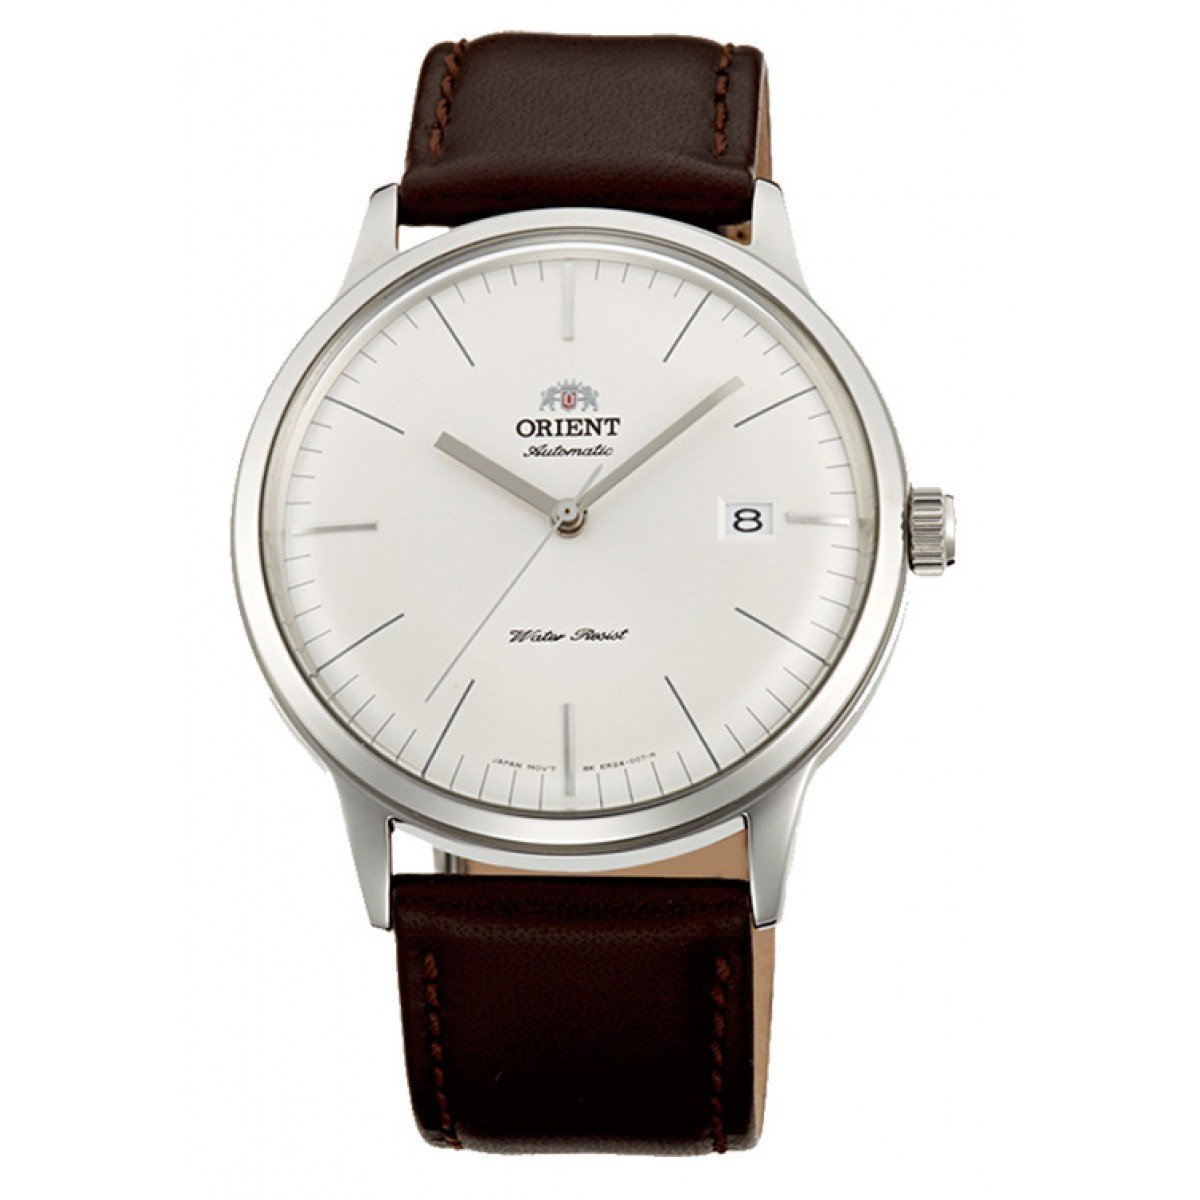 ORIENT Bambino FAC0000EW automatic men's watch white dial 40.5mm Hand-hacking self-winding leather strap